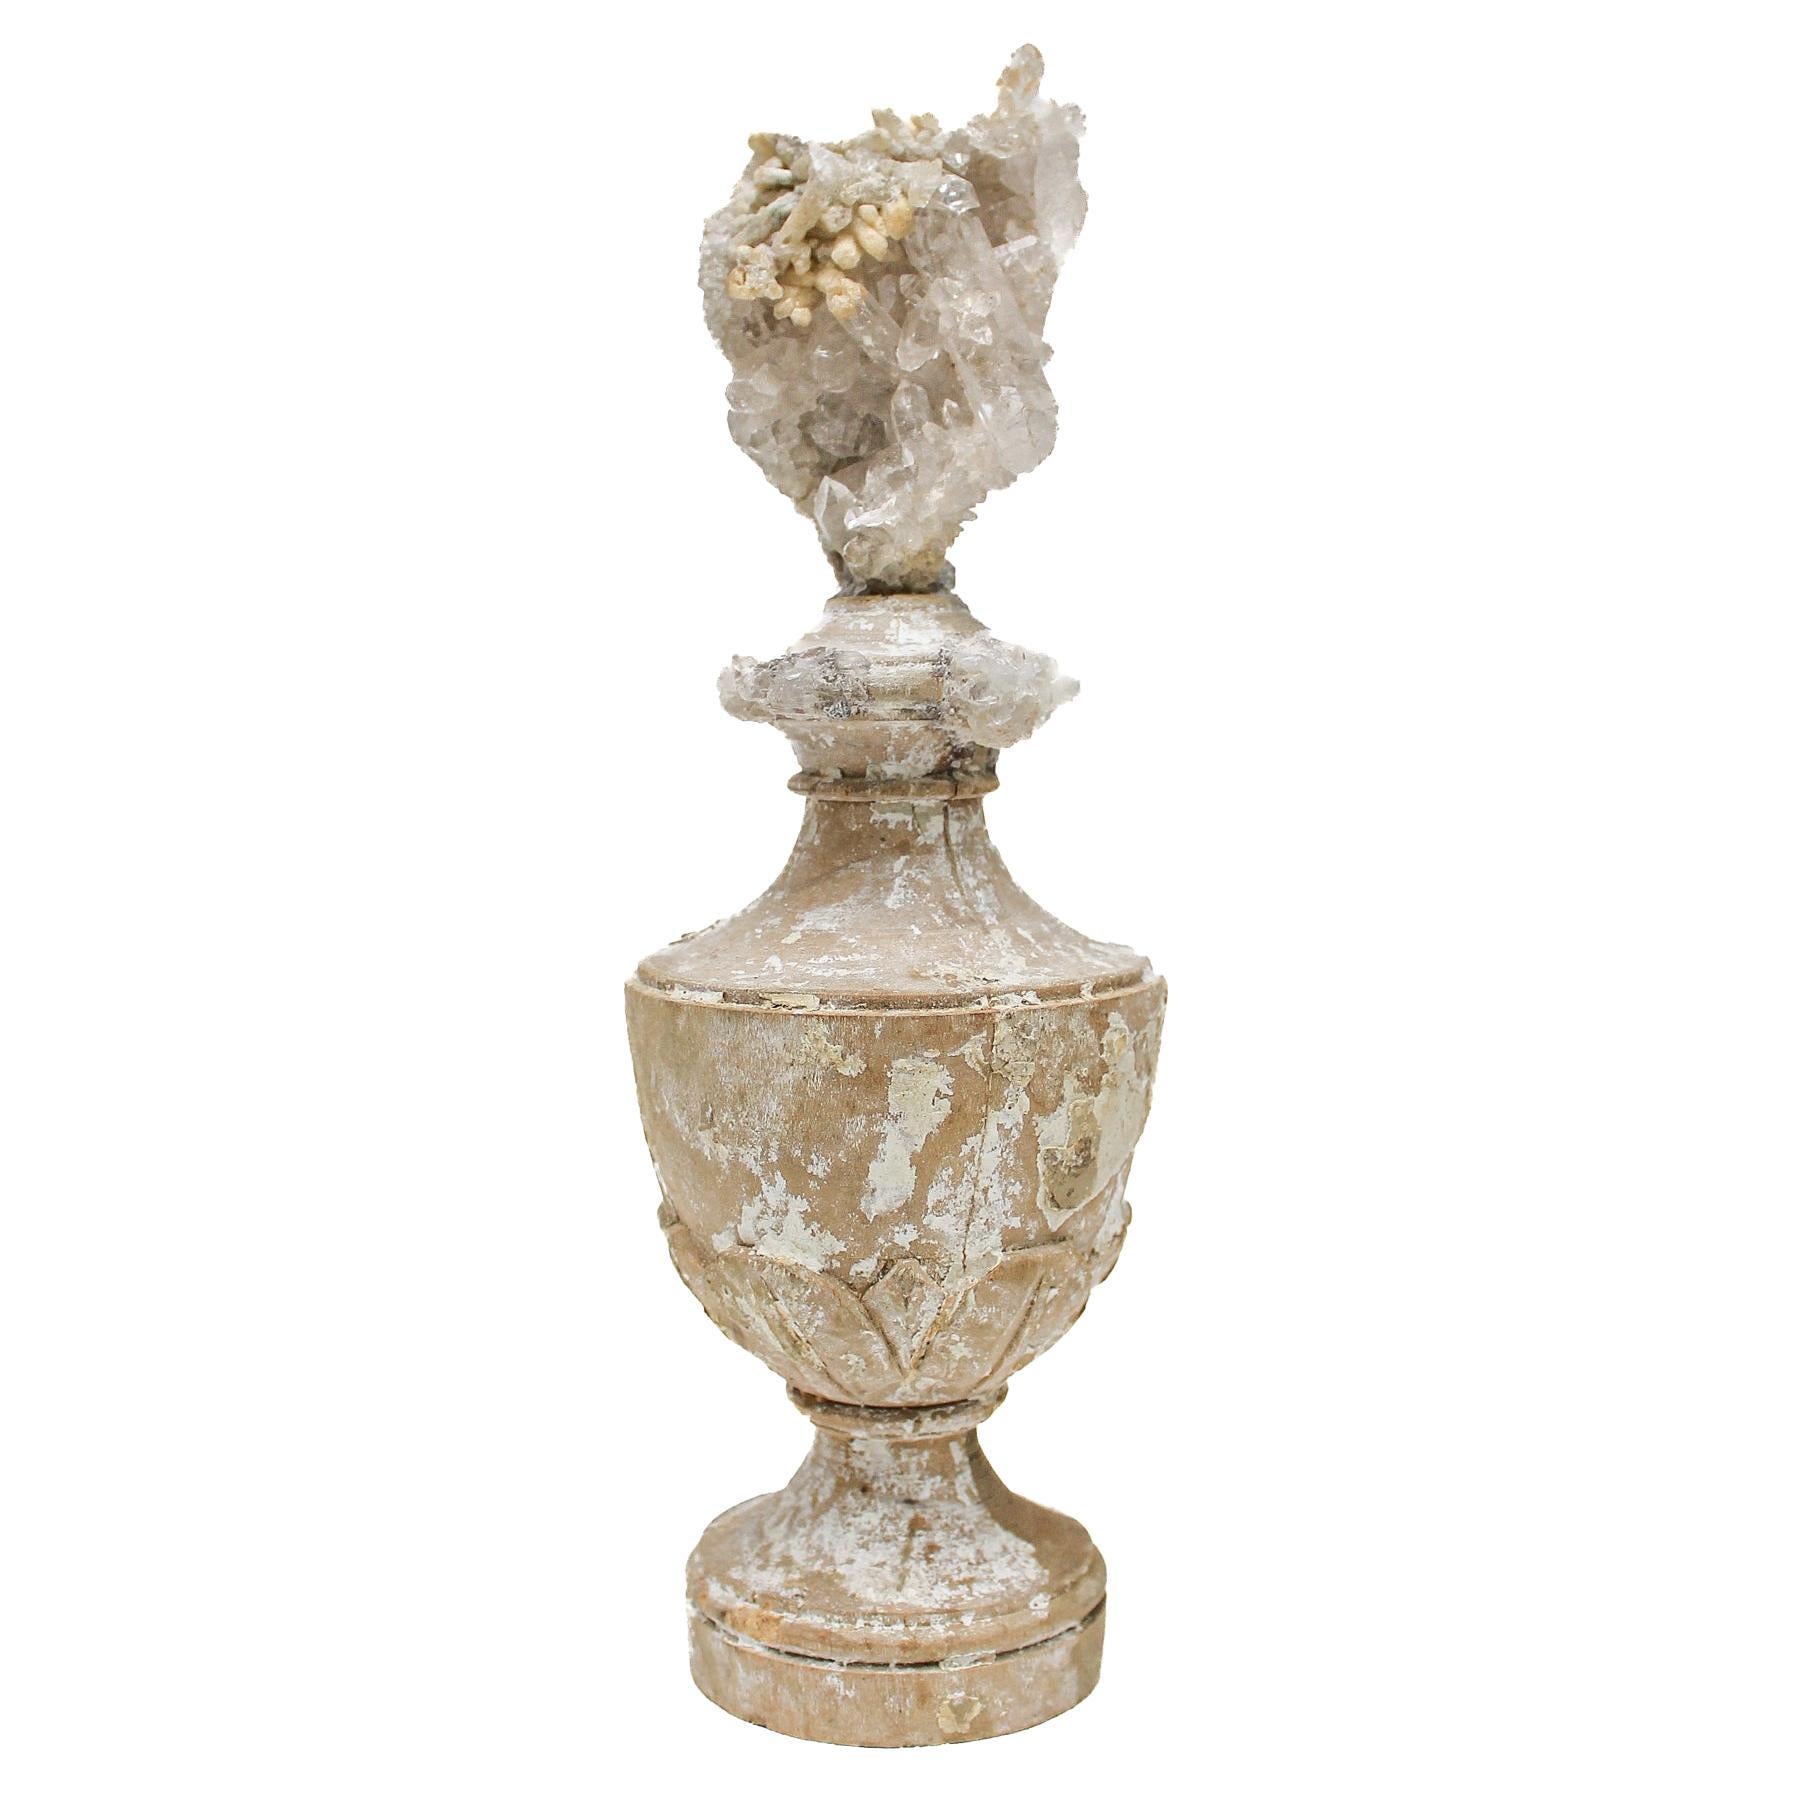 17th Century 'Florence Fragment' Vase with a Crystal Quartz Cluster with Calcite